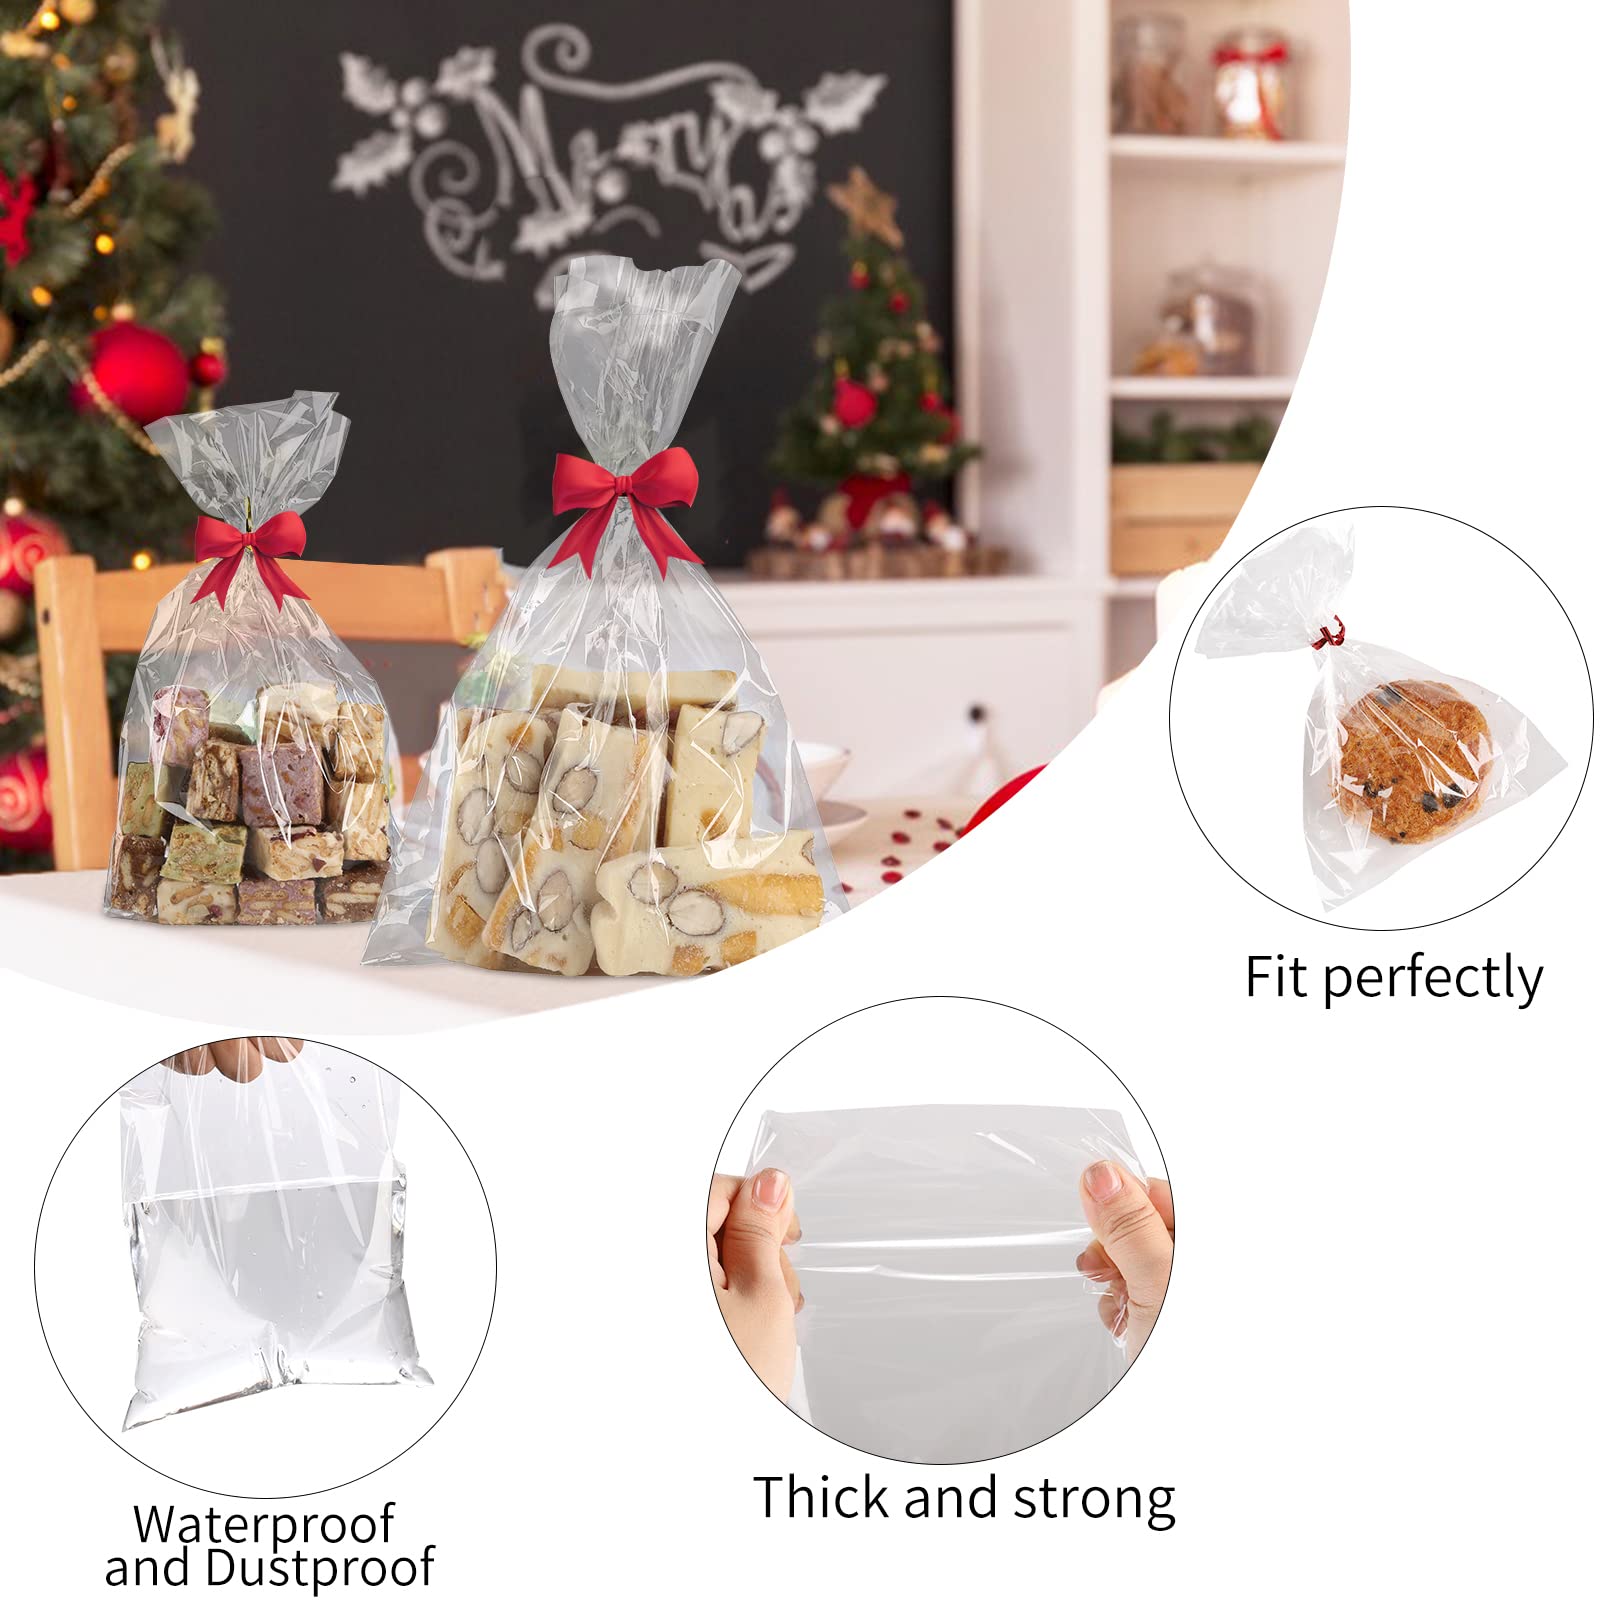 MoloTAR 100 Pcs 10 in x 6 in(1.4mil.) Clear Flat Cello Cellophane Treat Bags Good for Bakery, Cookies, Candies,Dessert with 5 random Twist Ties!